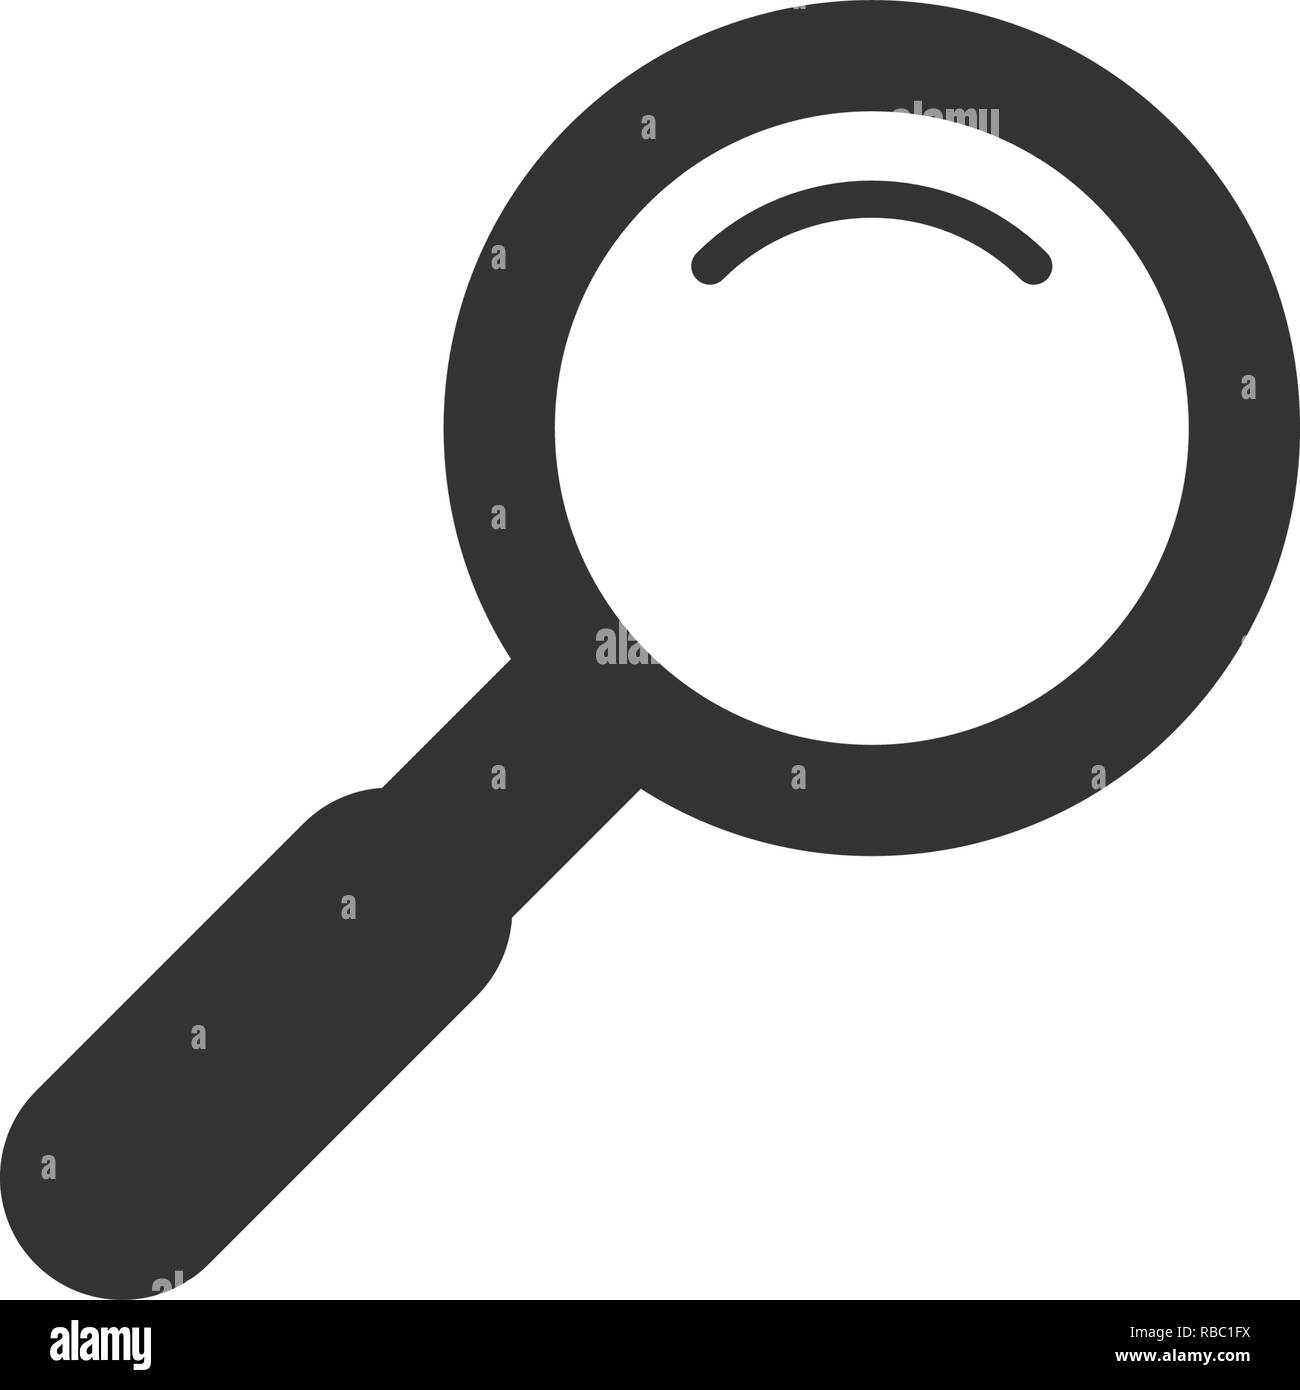 Magnifying glass graphic icon design template isolated Stock Vector ...